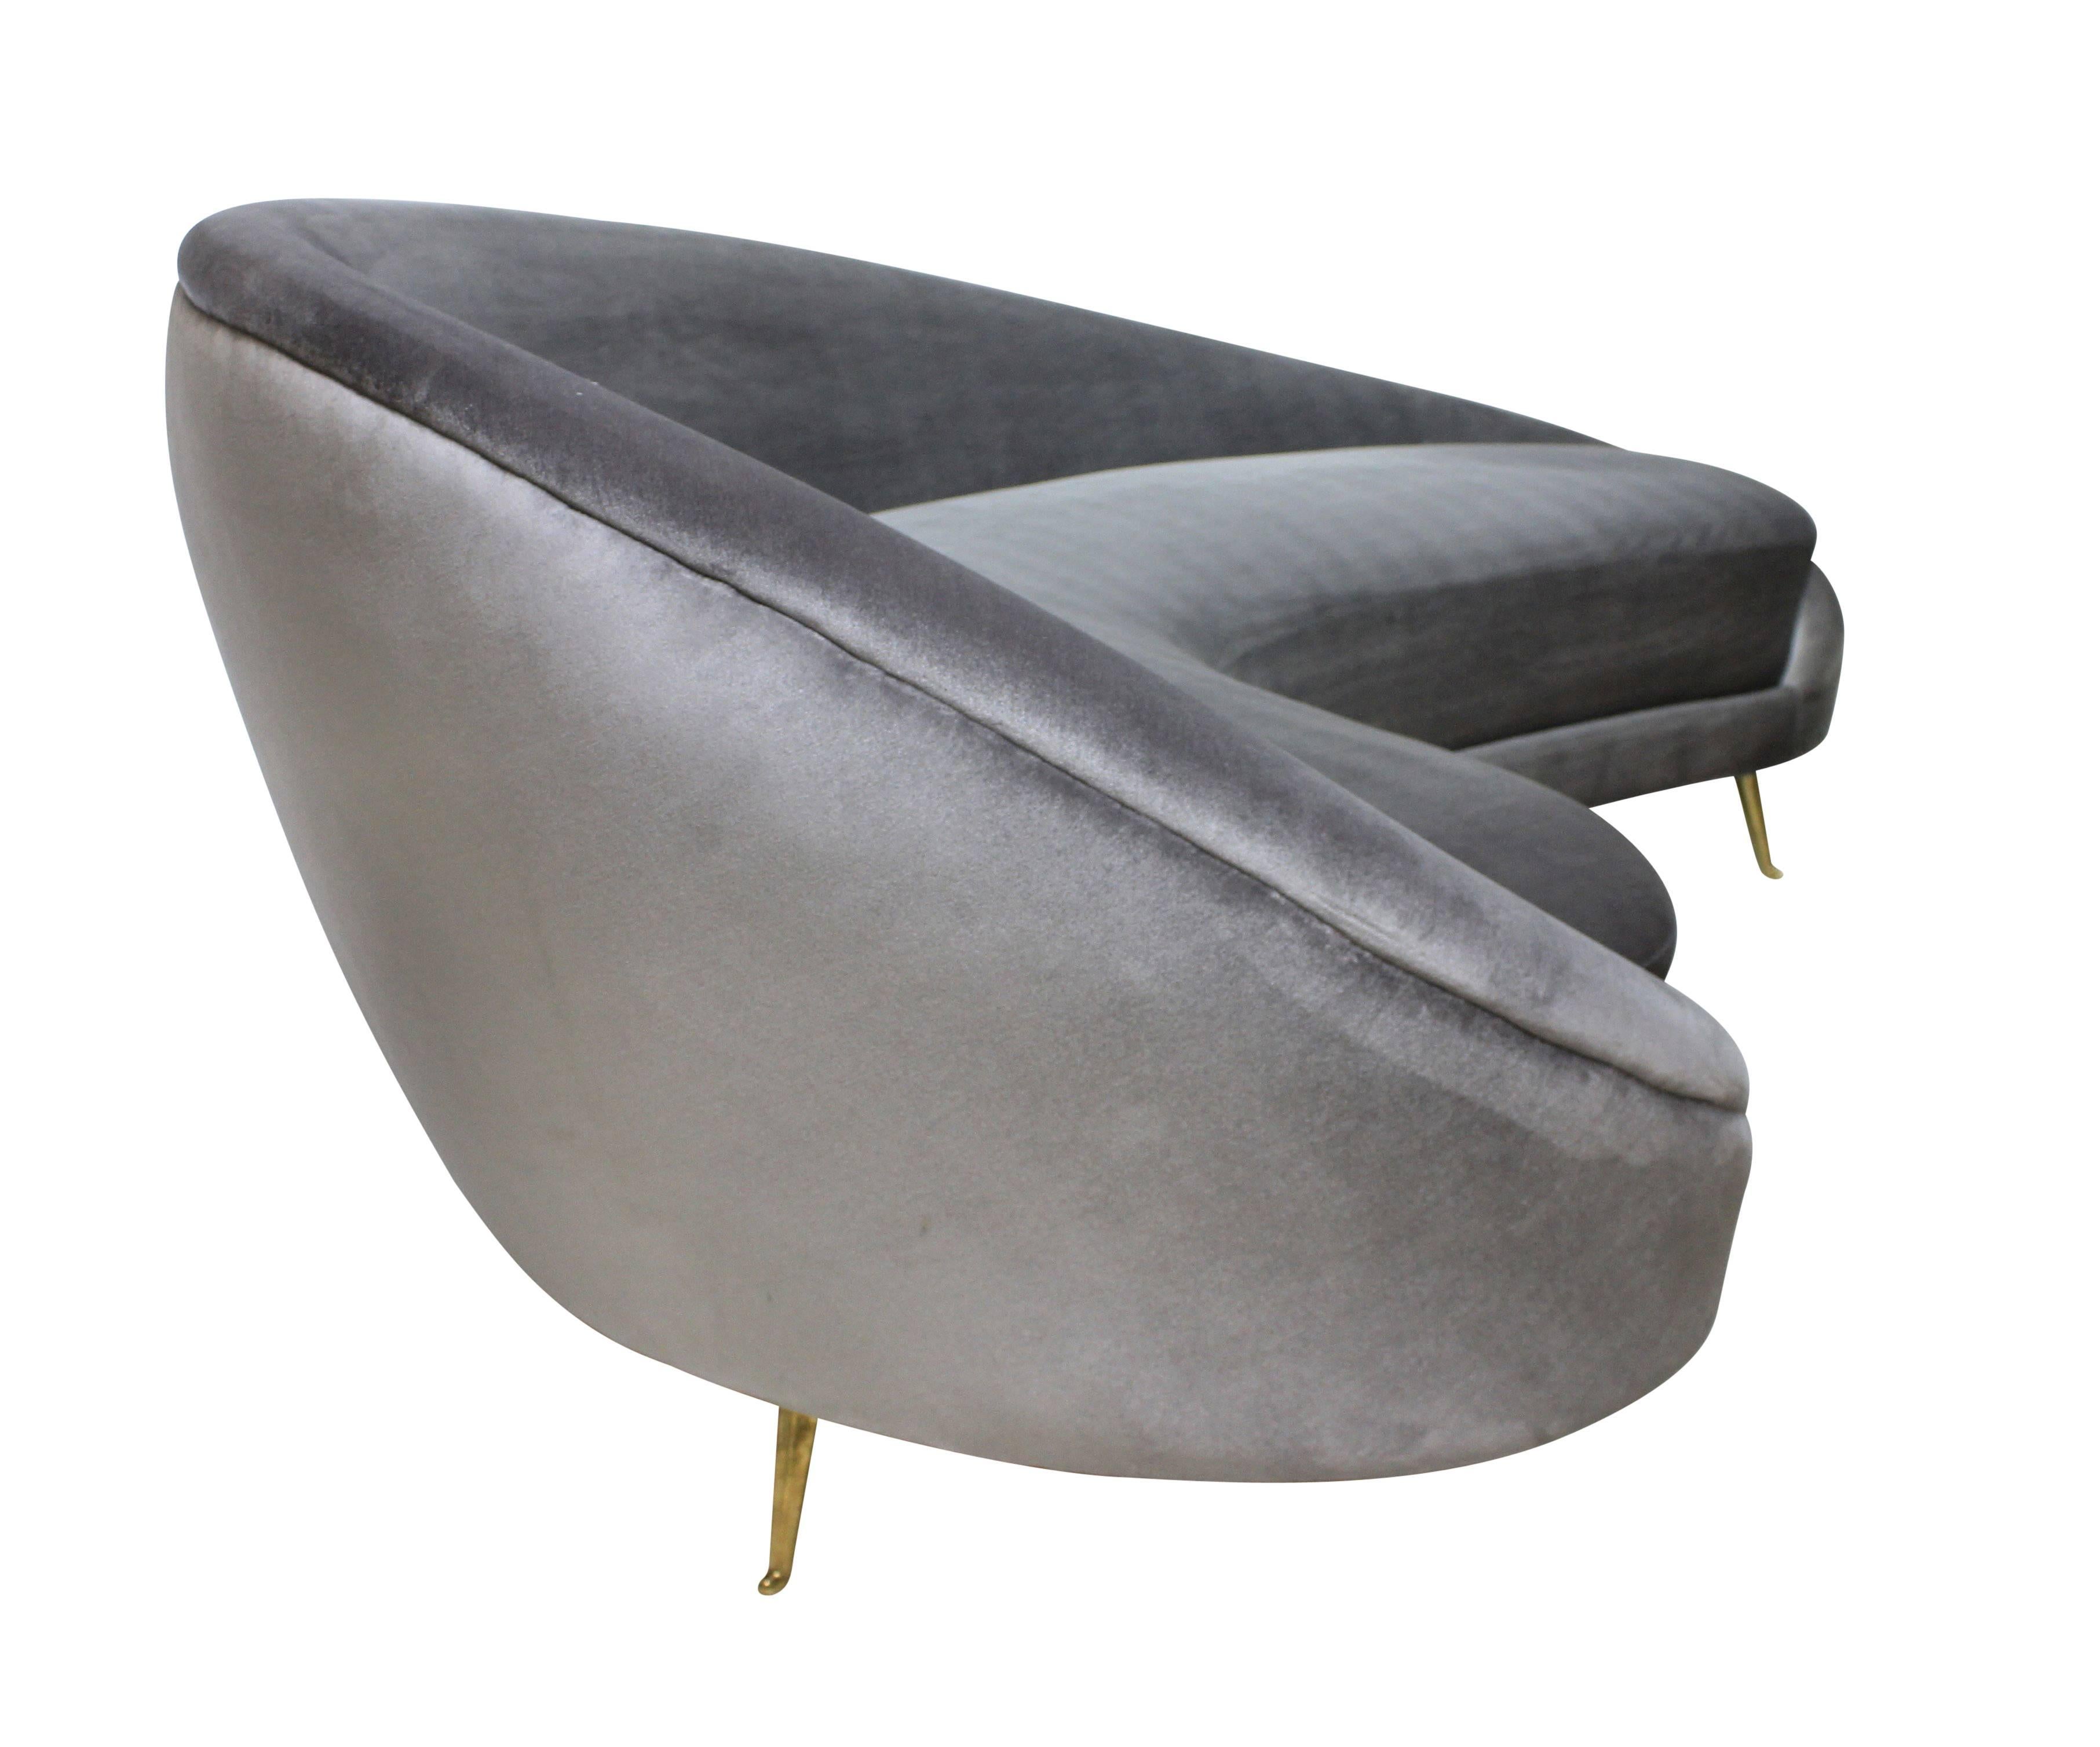 A large Italian curved asymmetrical sofa in the style of Ico Parisi, on brass feet by I.S.A and newly upholstered in a silver-grey silk velvet.